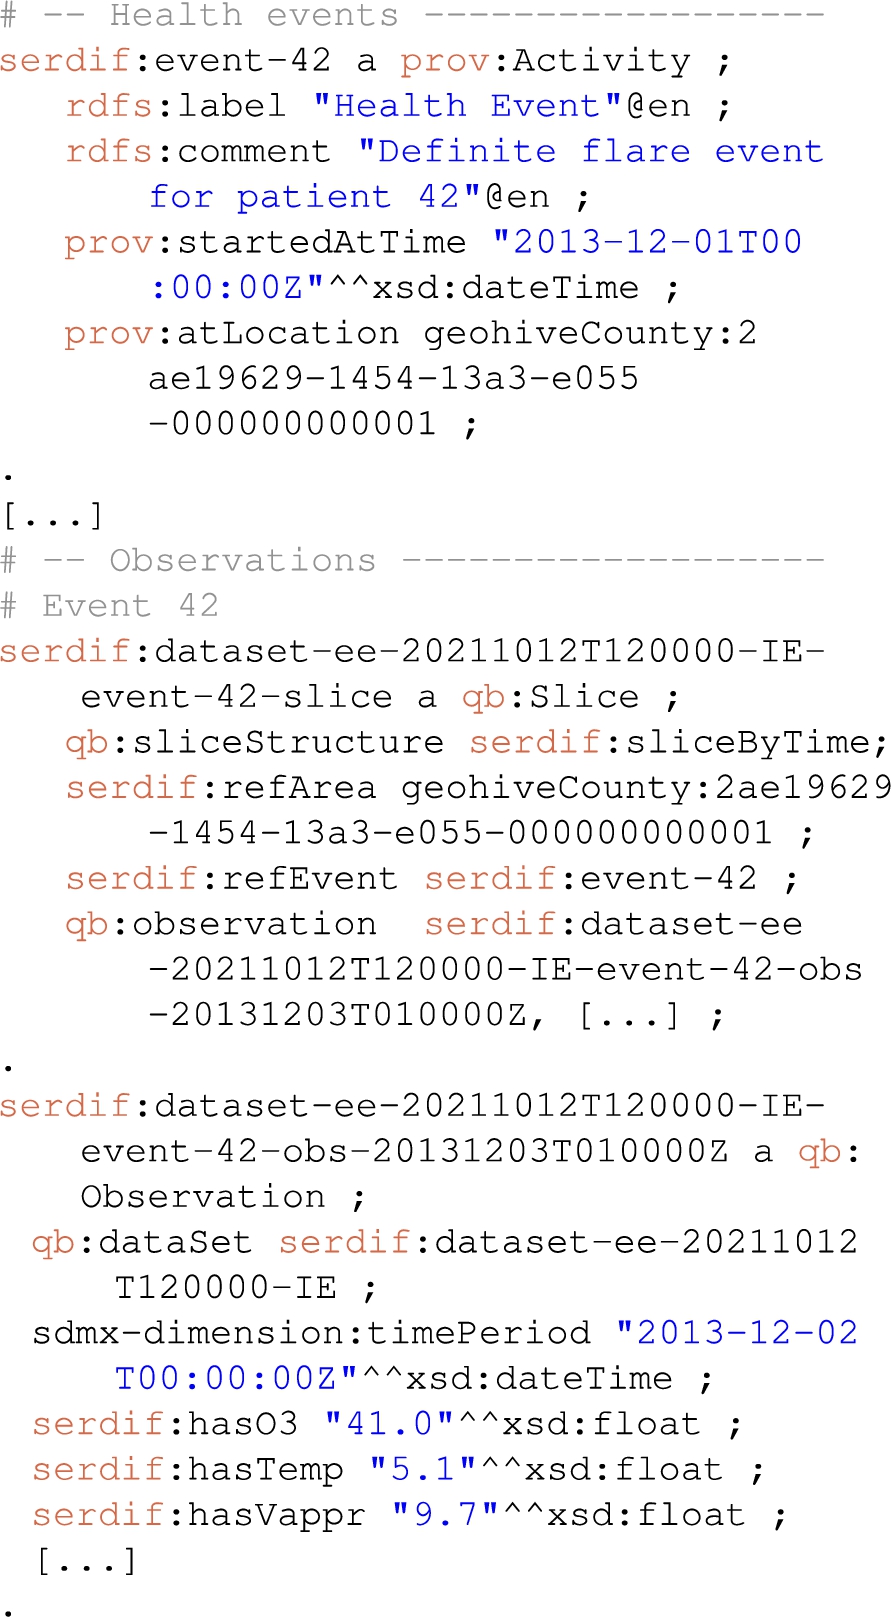 Snippet of a Turtle RDF file with health related events linked with environmental data.